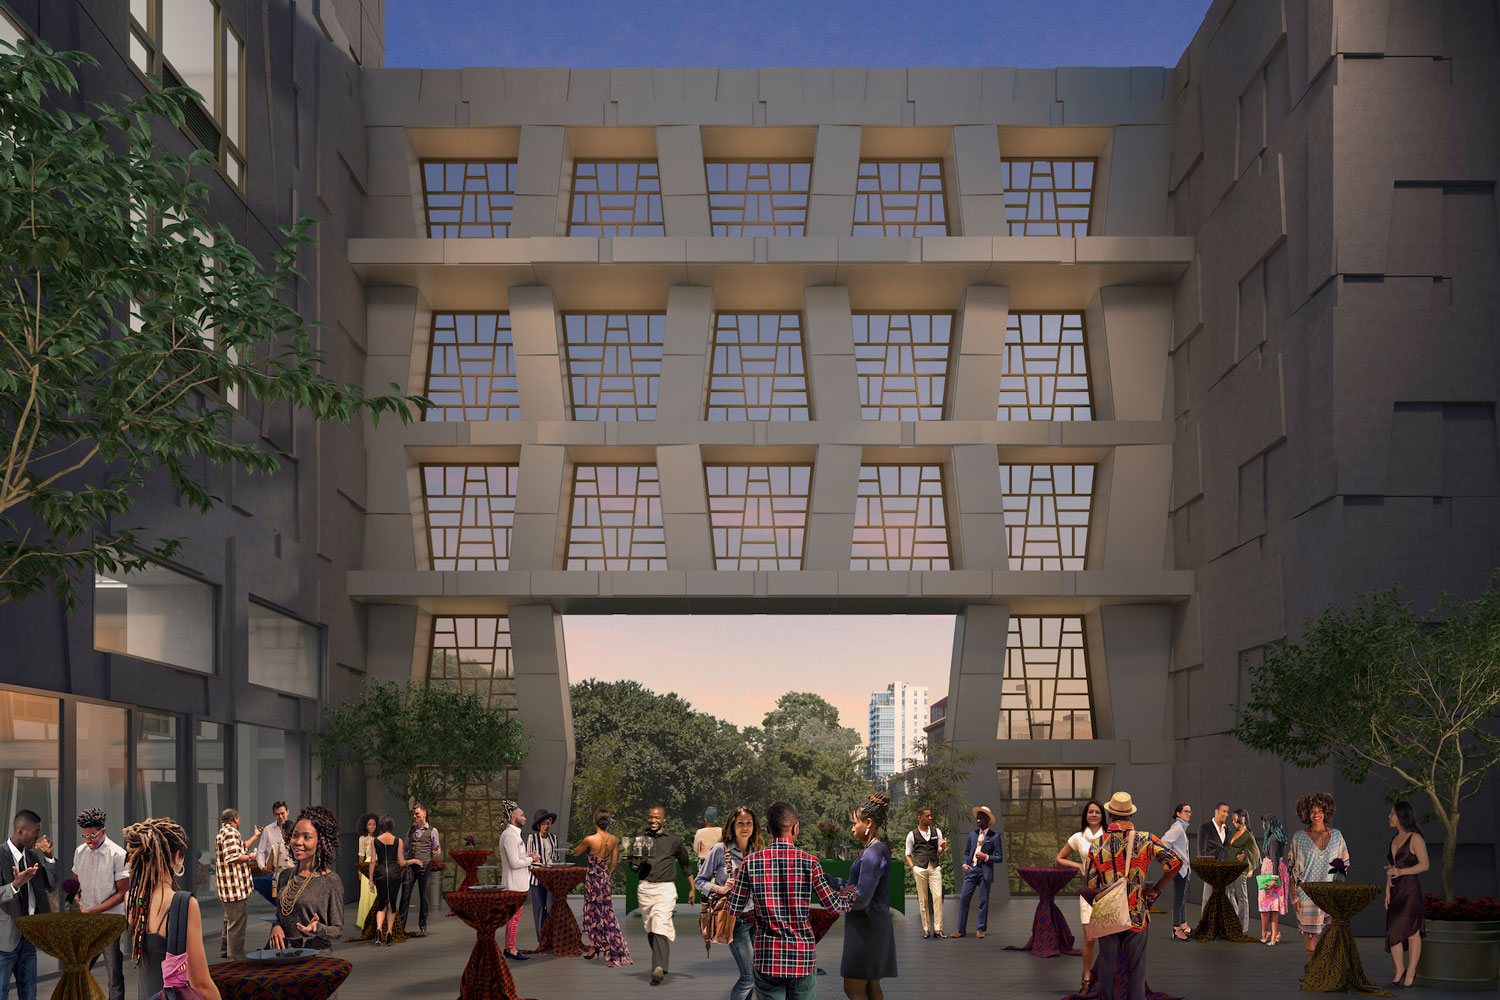 A rendering of the exterior facade and outdoor atrium at the Africa Center